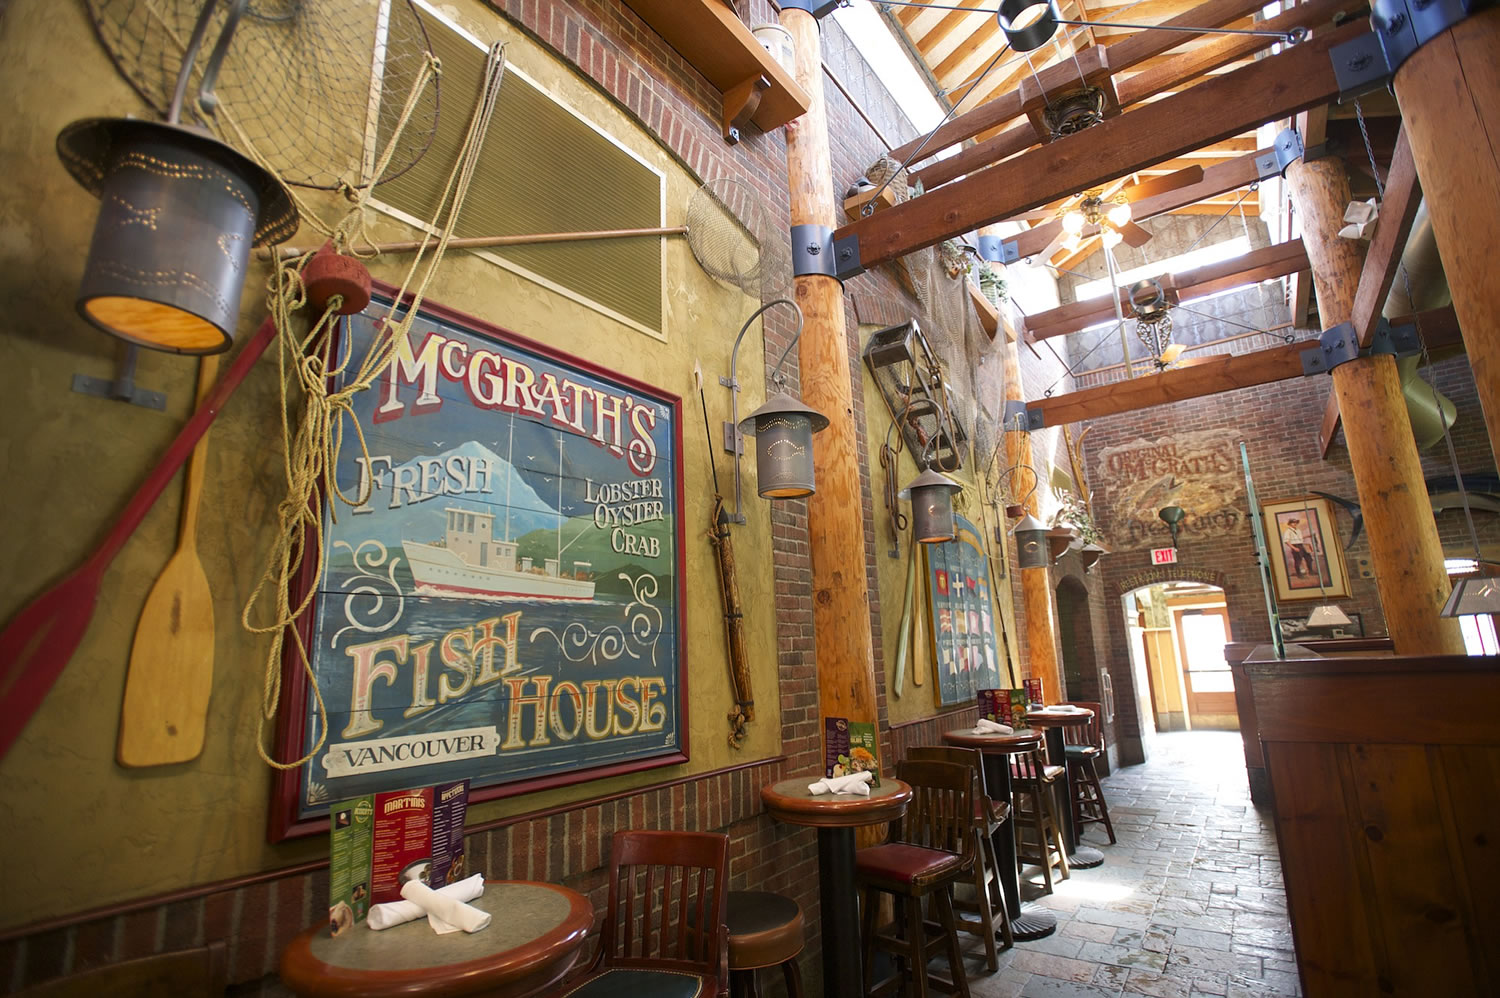 McGrath's Fish House's Vancouver location opened in 1999.